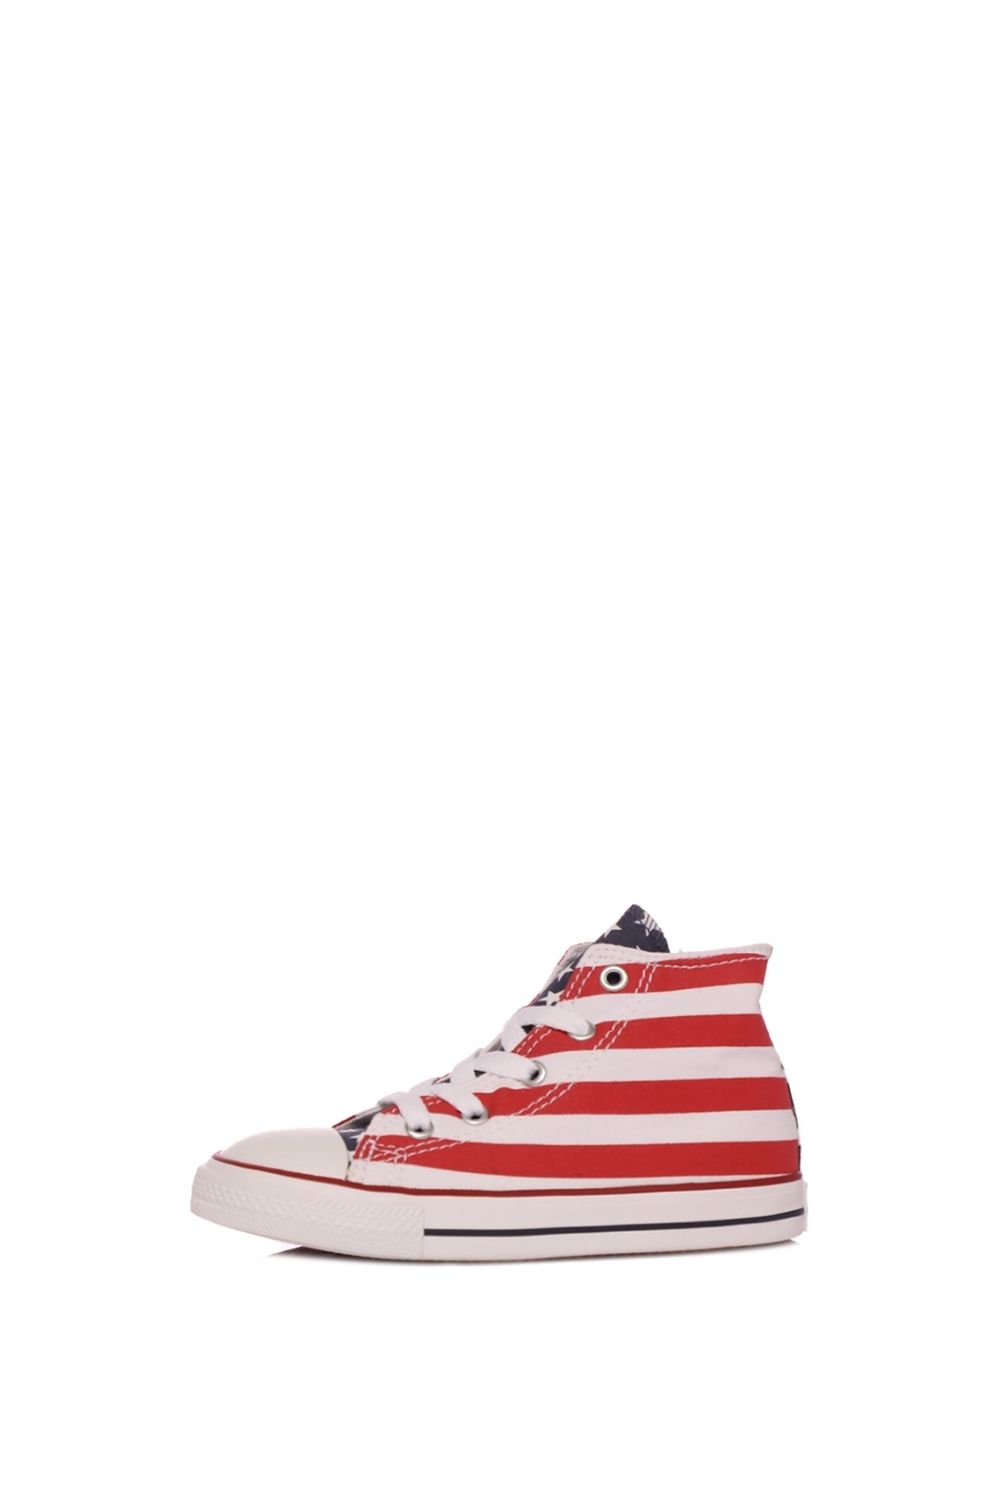 CONVERSE – Παιδικα sneakers CONVERSE Chuck Taylor All Star Print Hi λευκα κοκκινα